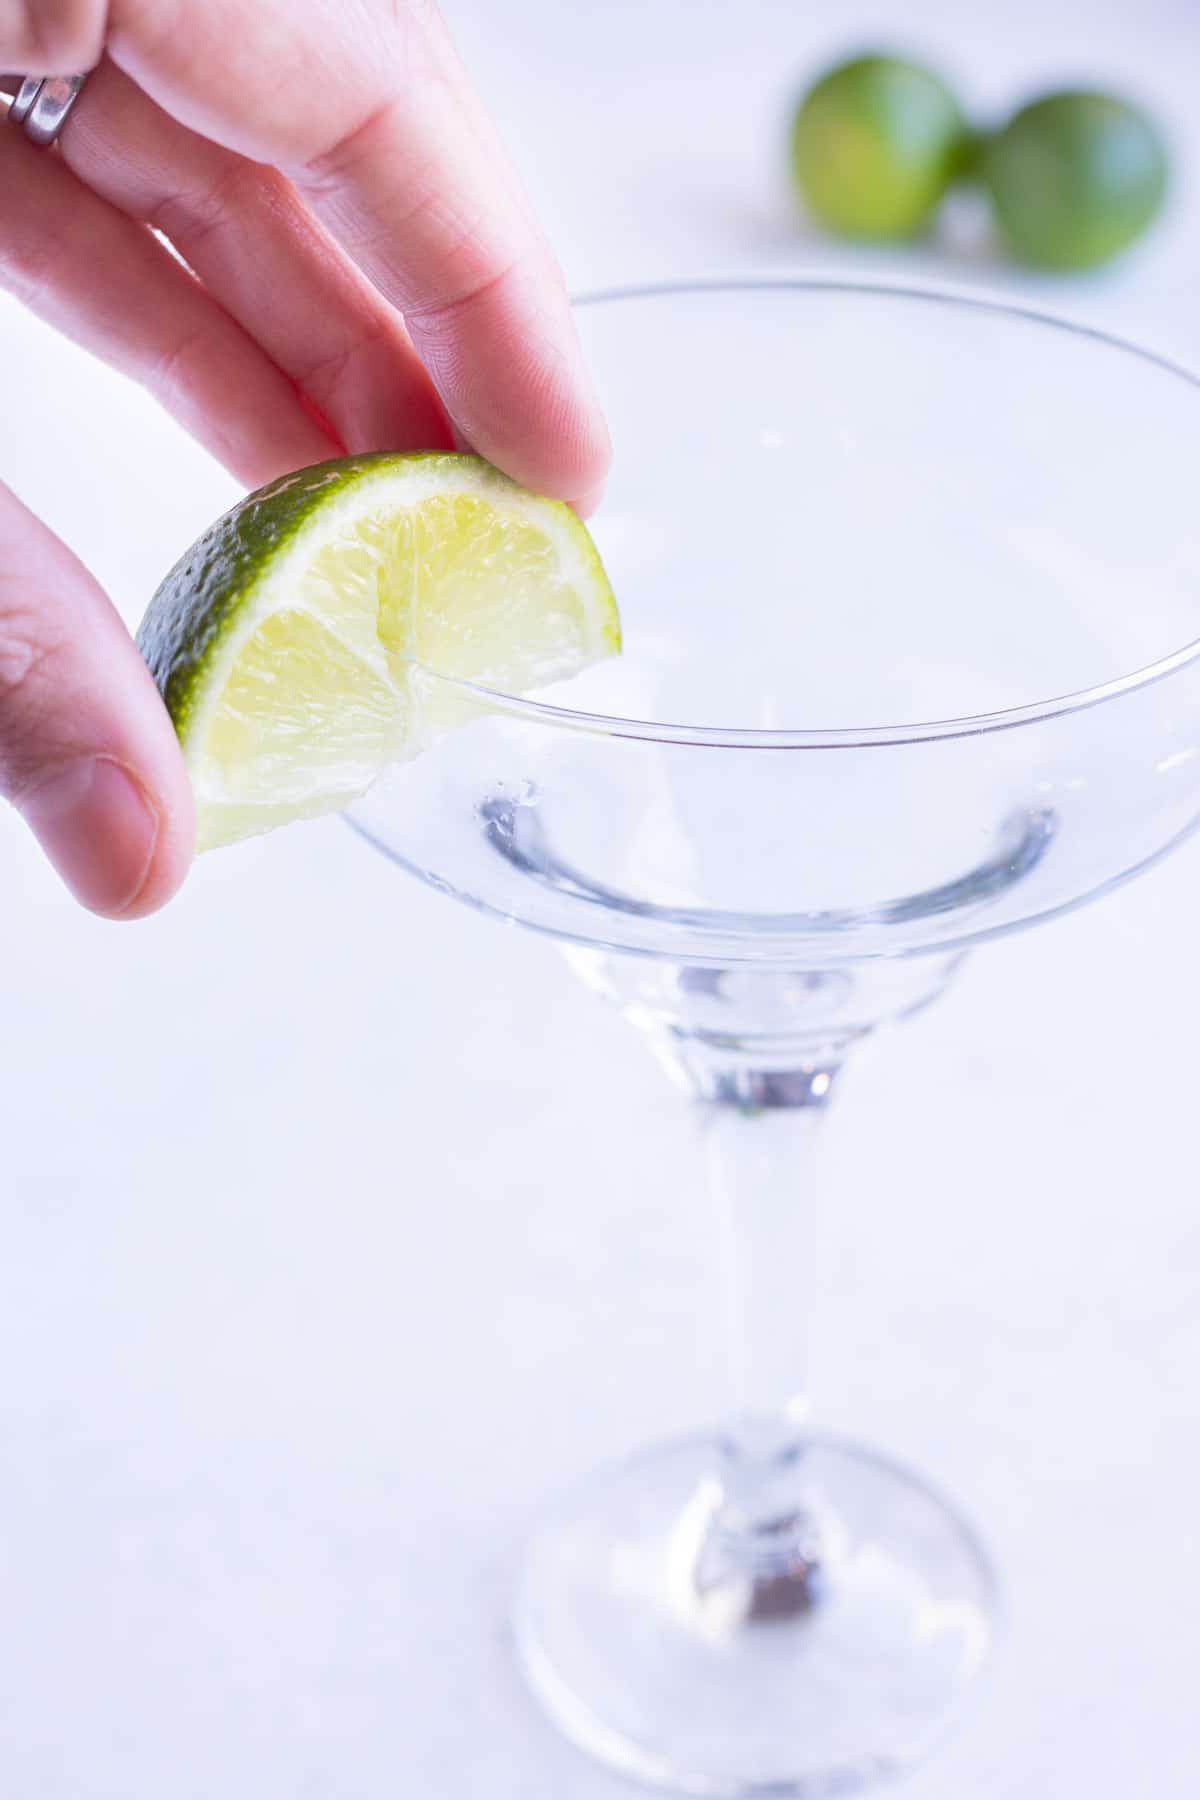 Lime wedges are used to salt the glass.